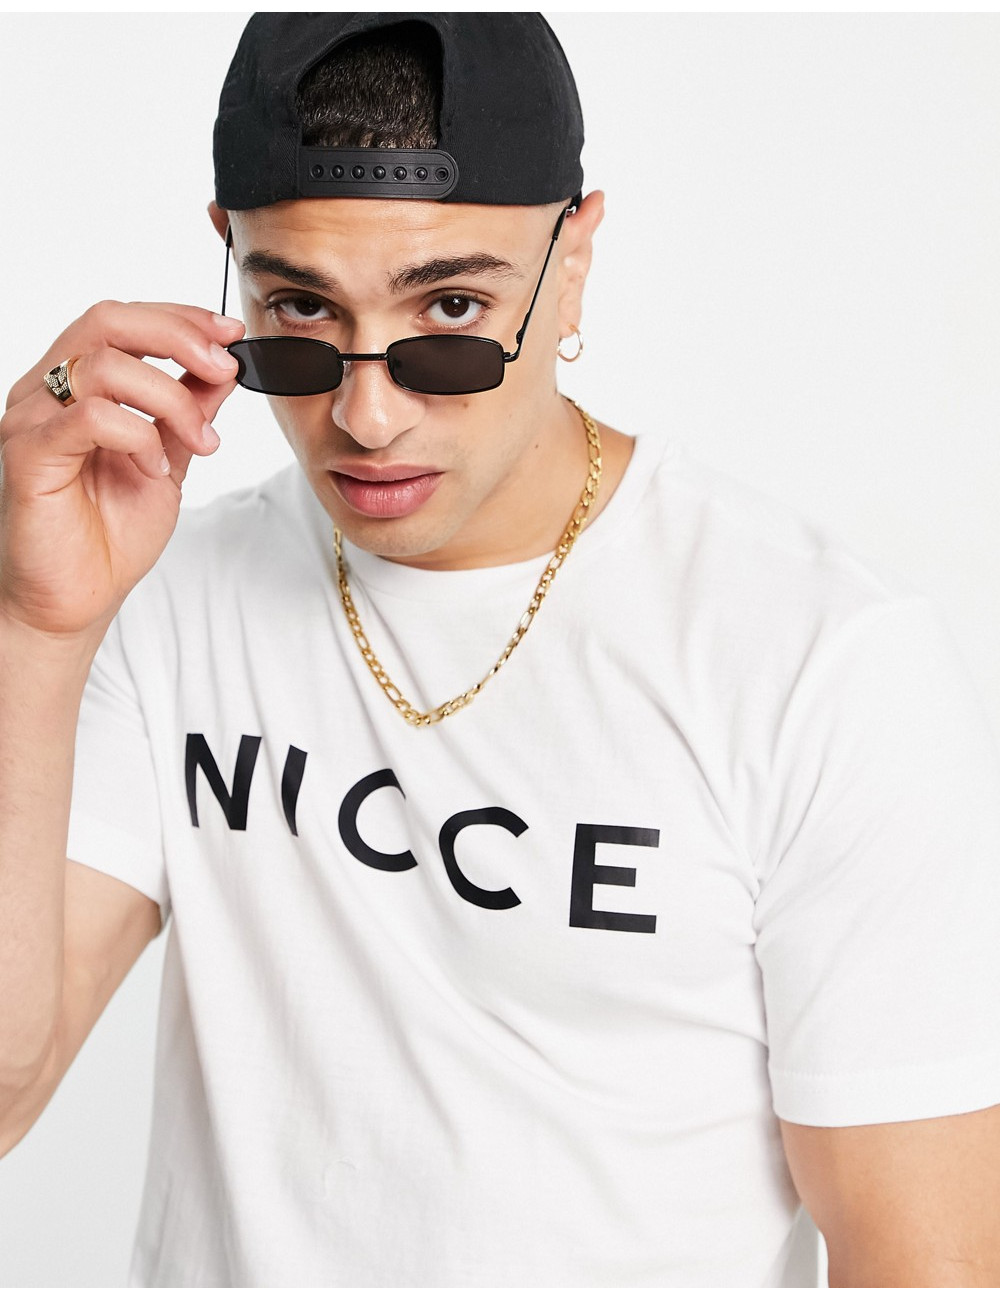 Nicce logo t-shirt in white